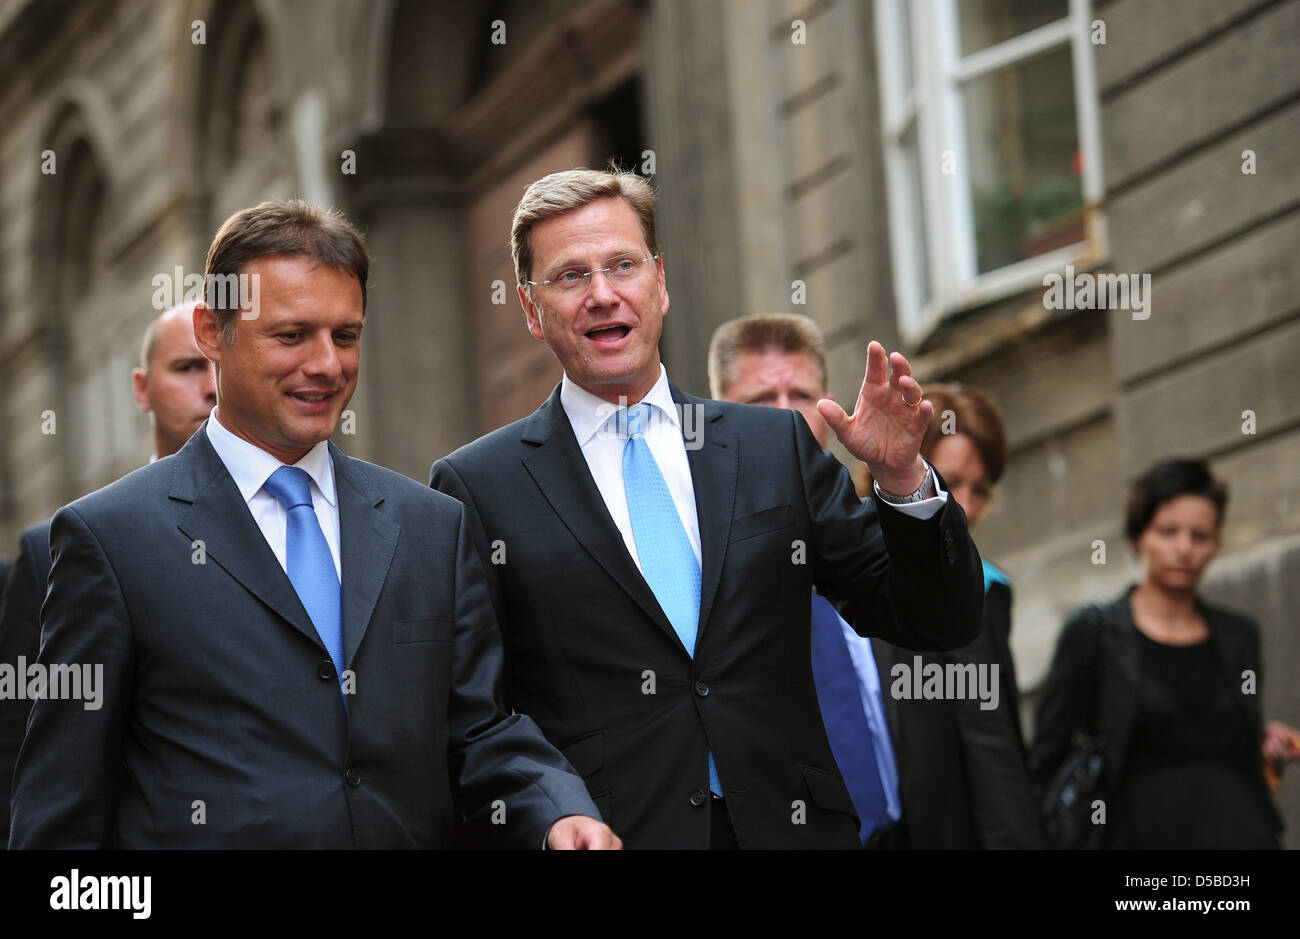 The Croatian Foreign Minister Gordan Jandrokovic (L) and German Foreign Minister Guido Westerwelle talk during a walk through the old city centre of Zagreb, Croatia, 25 August 2010. Westerwelle visits the Balkan states during a three-day trip. PHOTO: HANNIBAL HANSCHKE Stock Photo